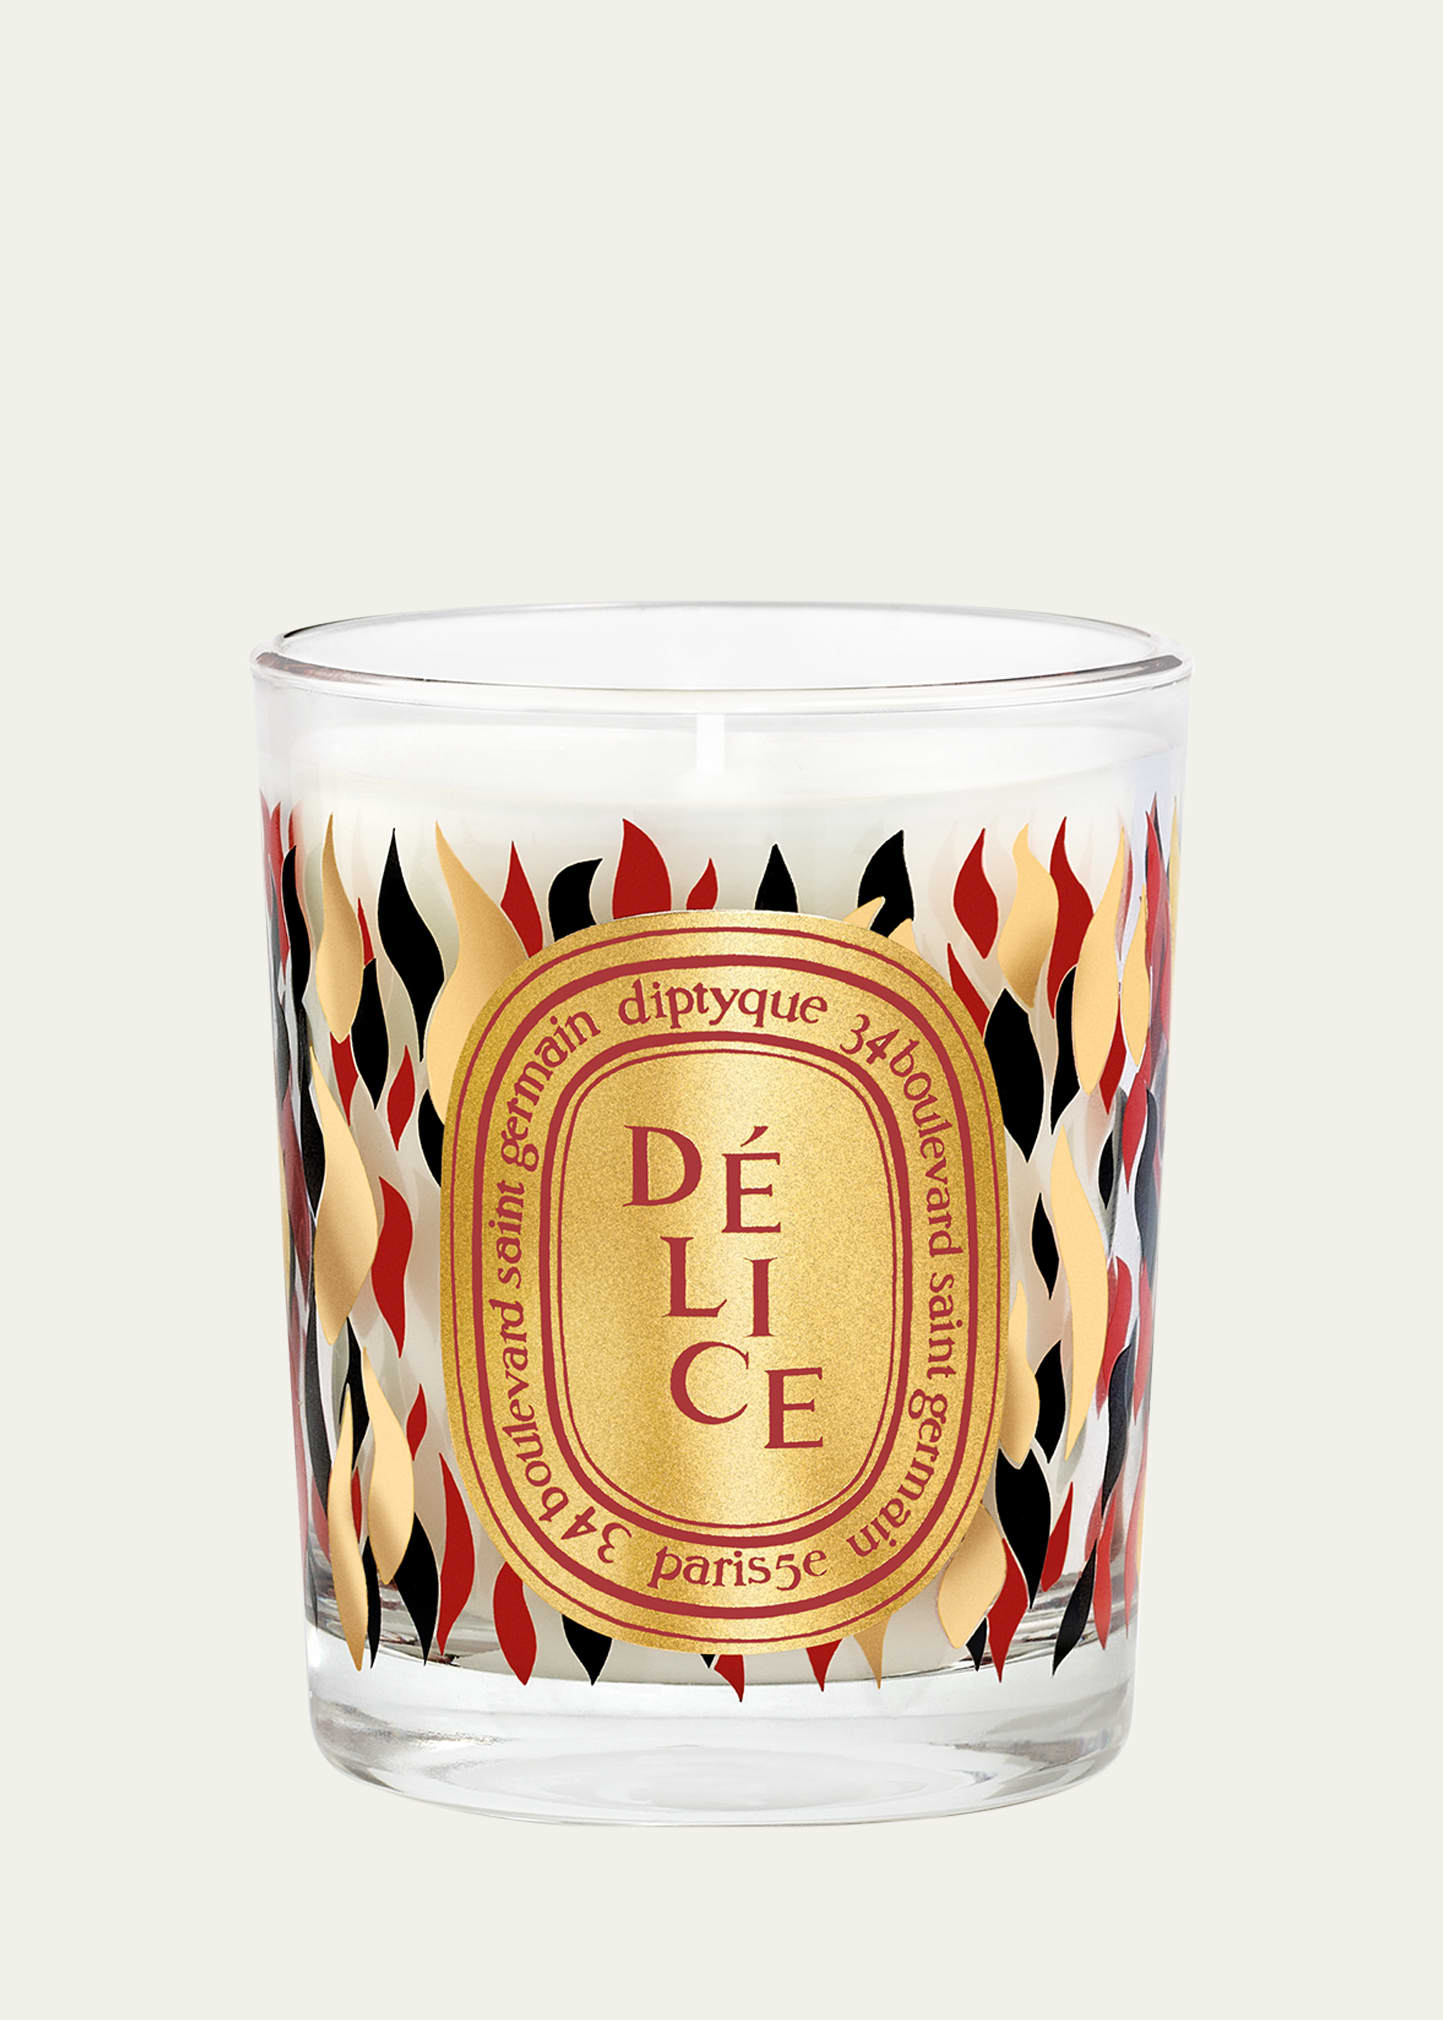 Delice (Delicious) Scented Candle - Limited Edition